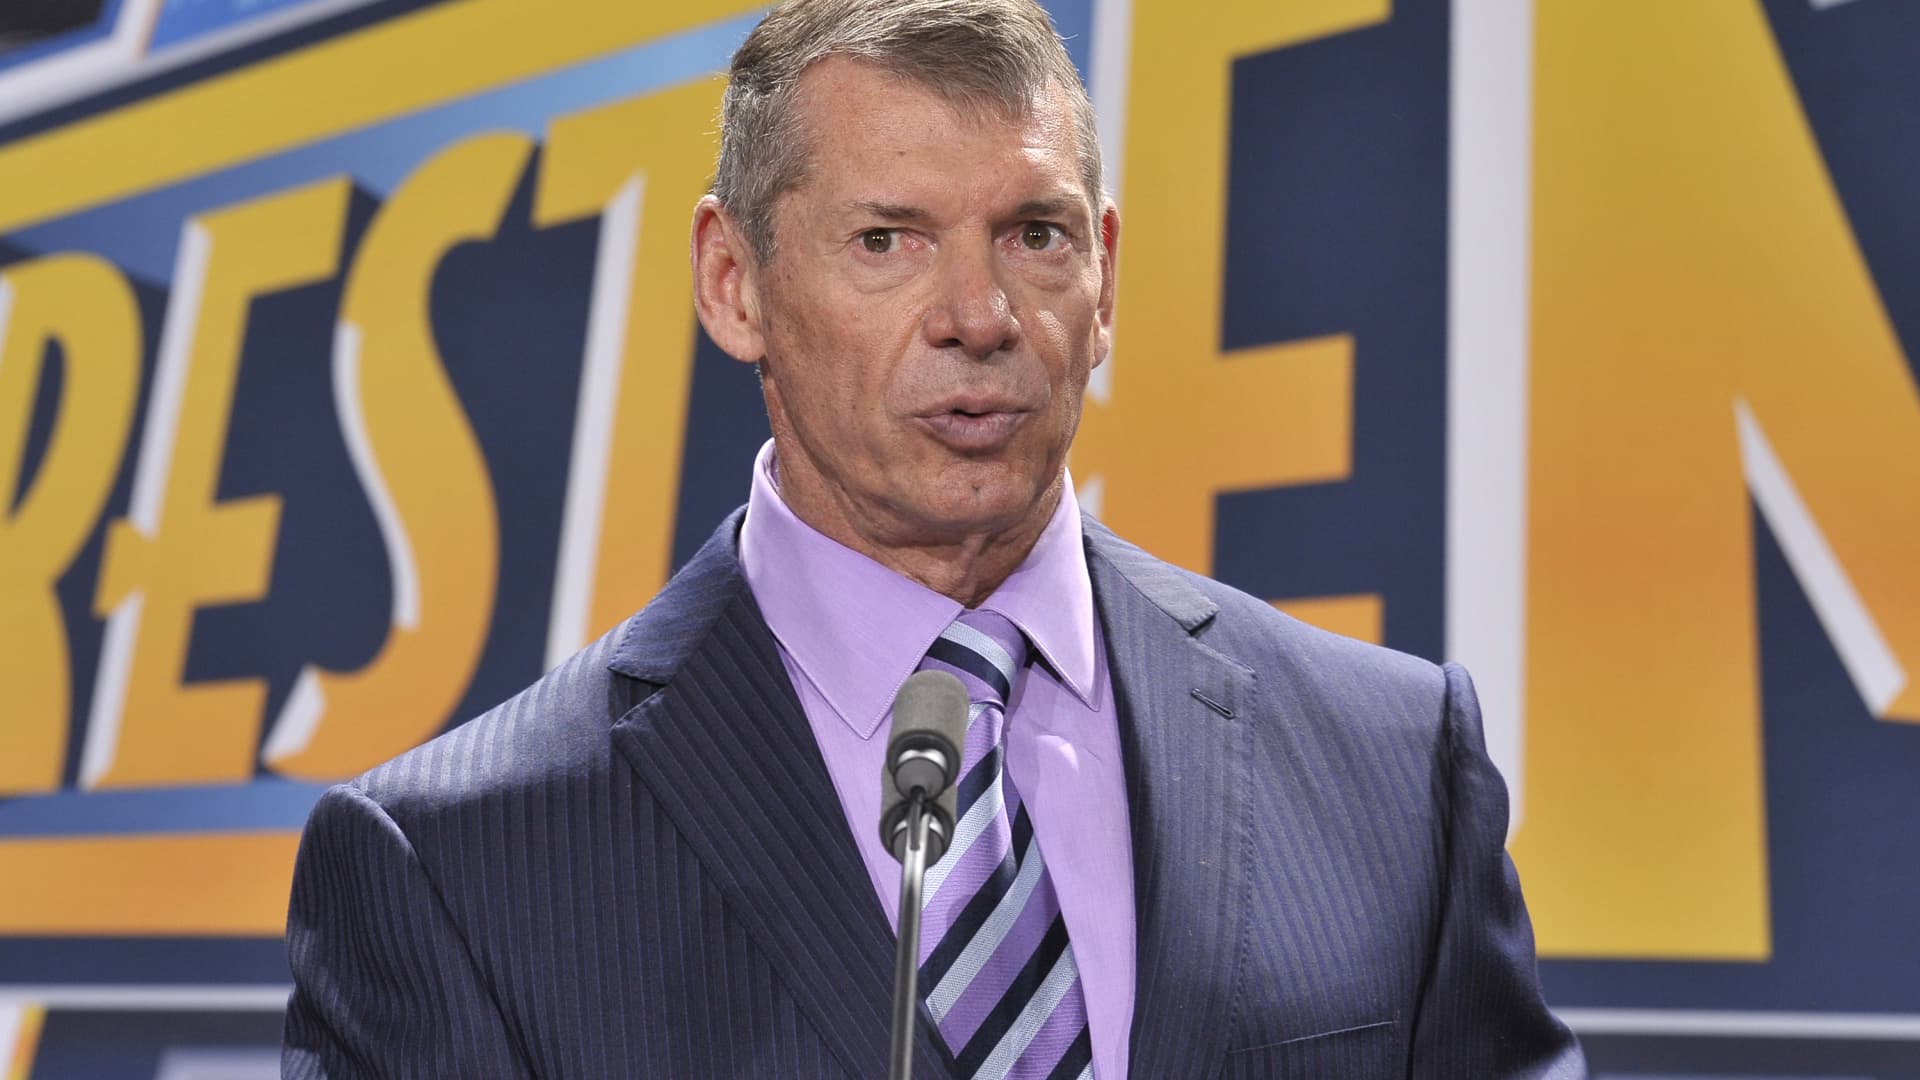 WWE boss Vince McMahon sued over alleged sexual assault, trafficking